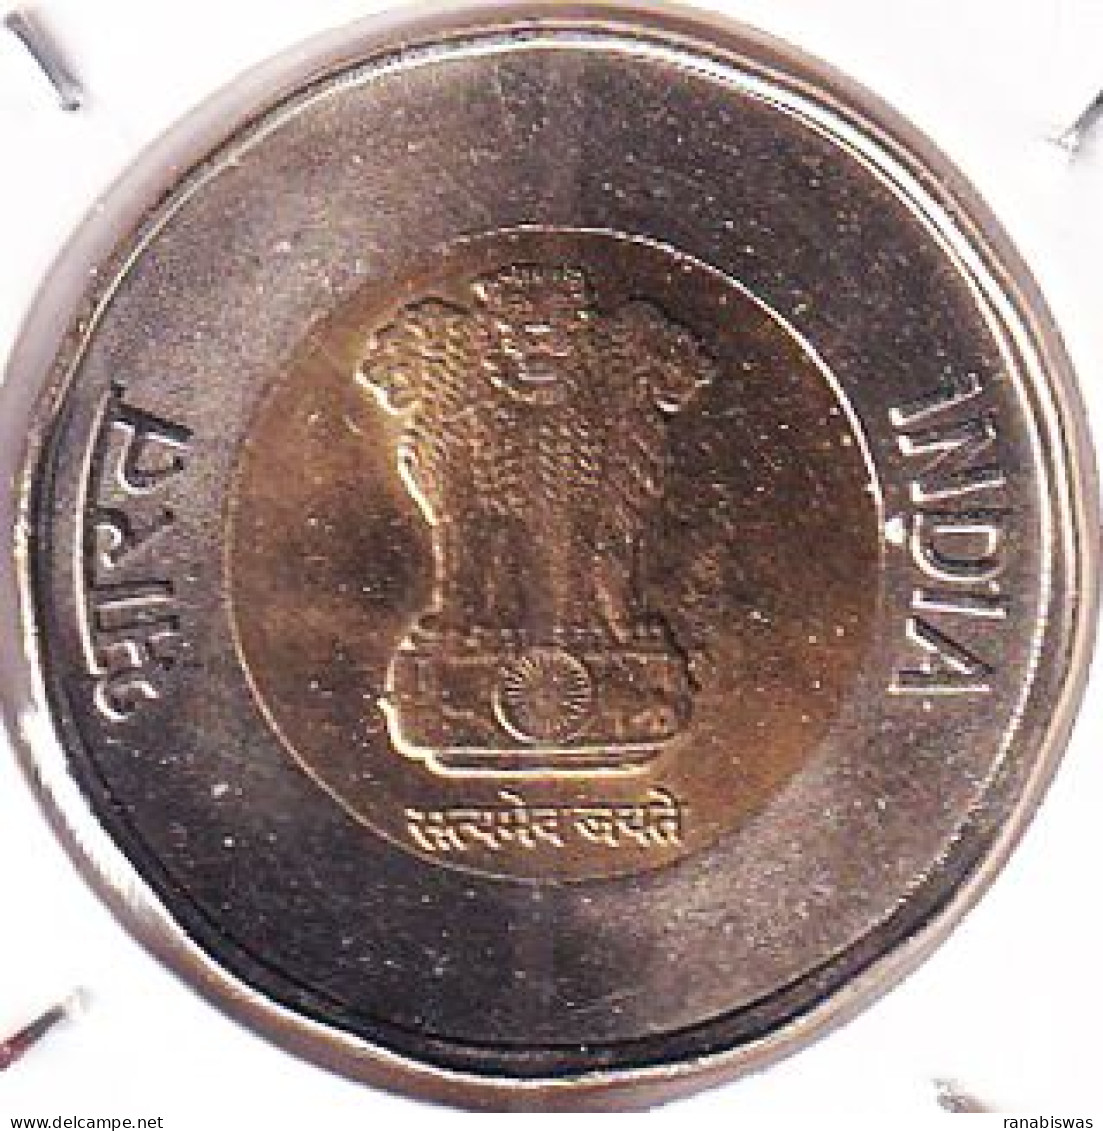 INDIA COIN LOT 444, 20 RUPEES 2022, AKAM, HYDERABAD MINT, UNC - Indien